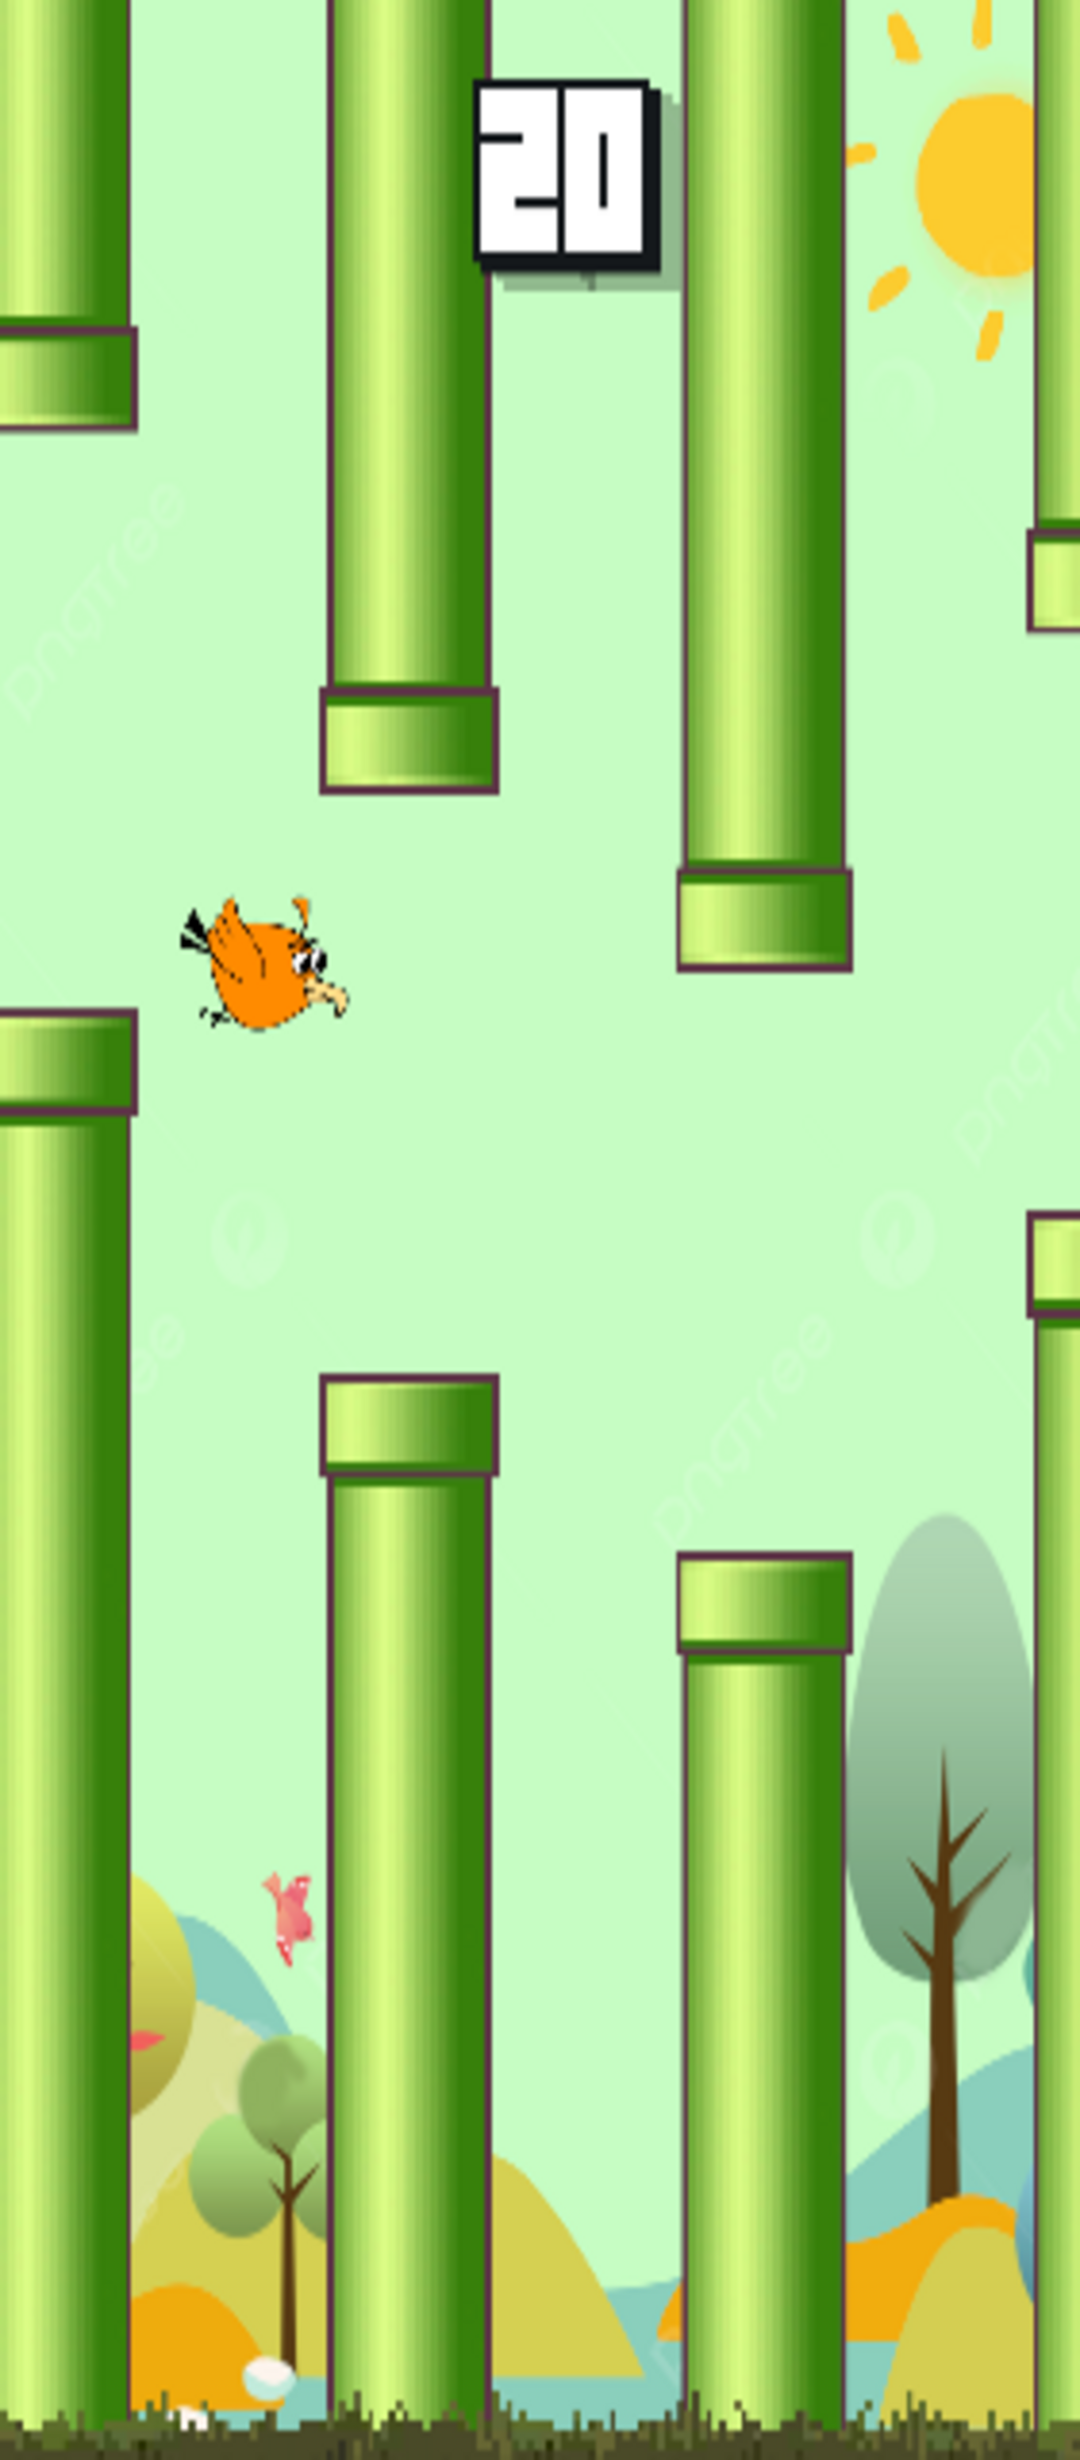 Fly Bird 2 Flappy wings::Appstore for Android